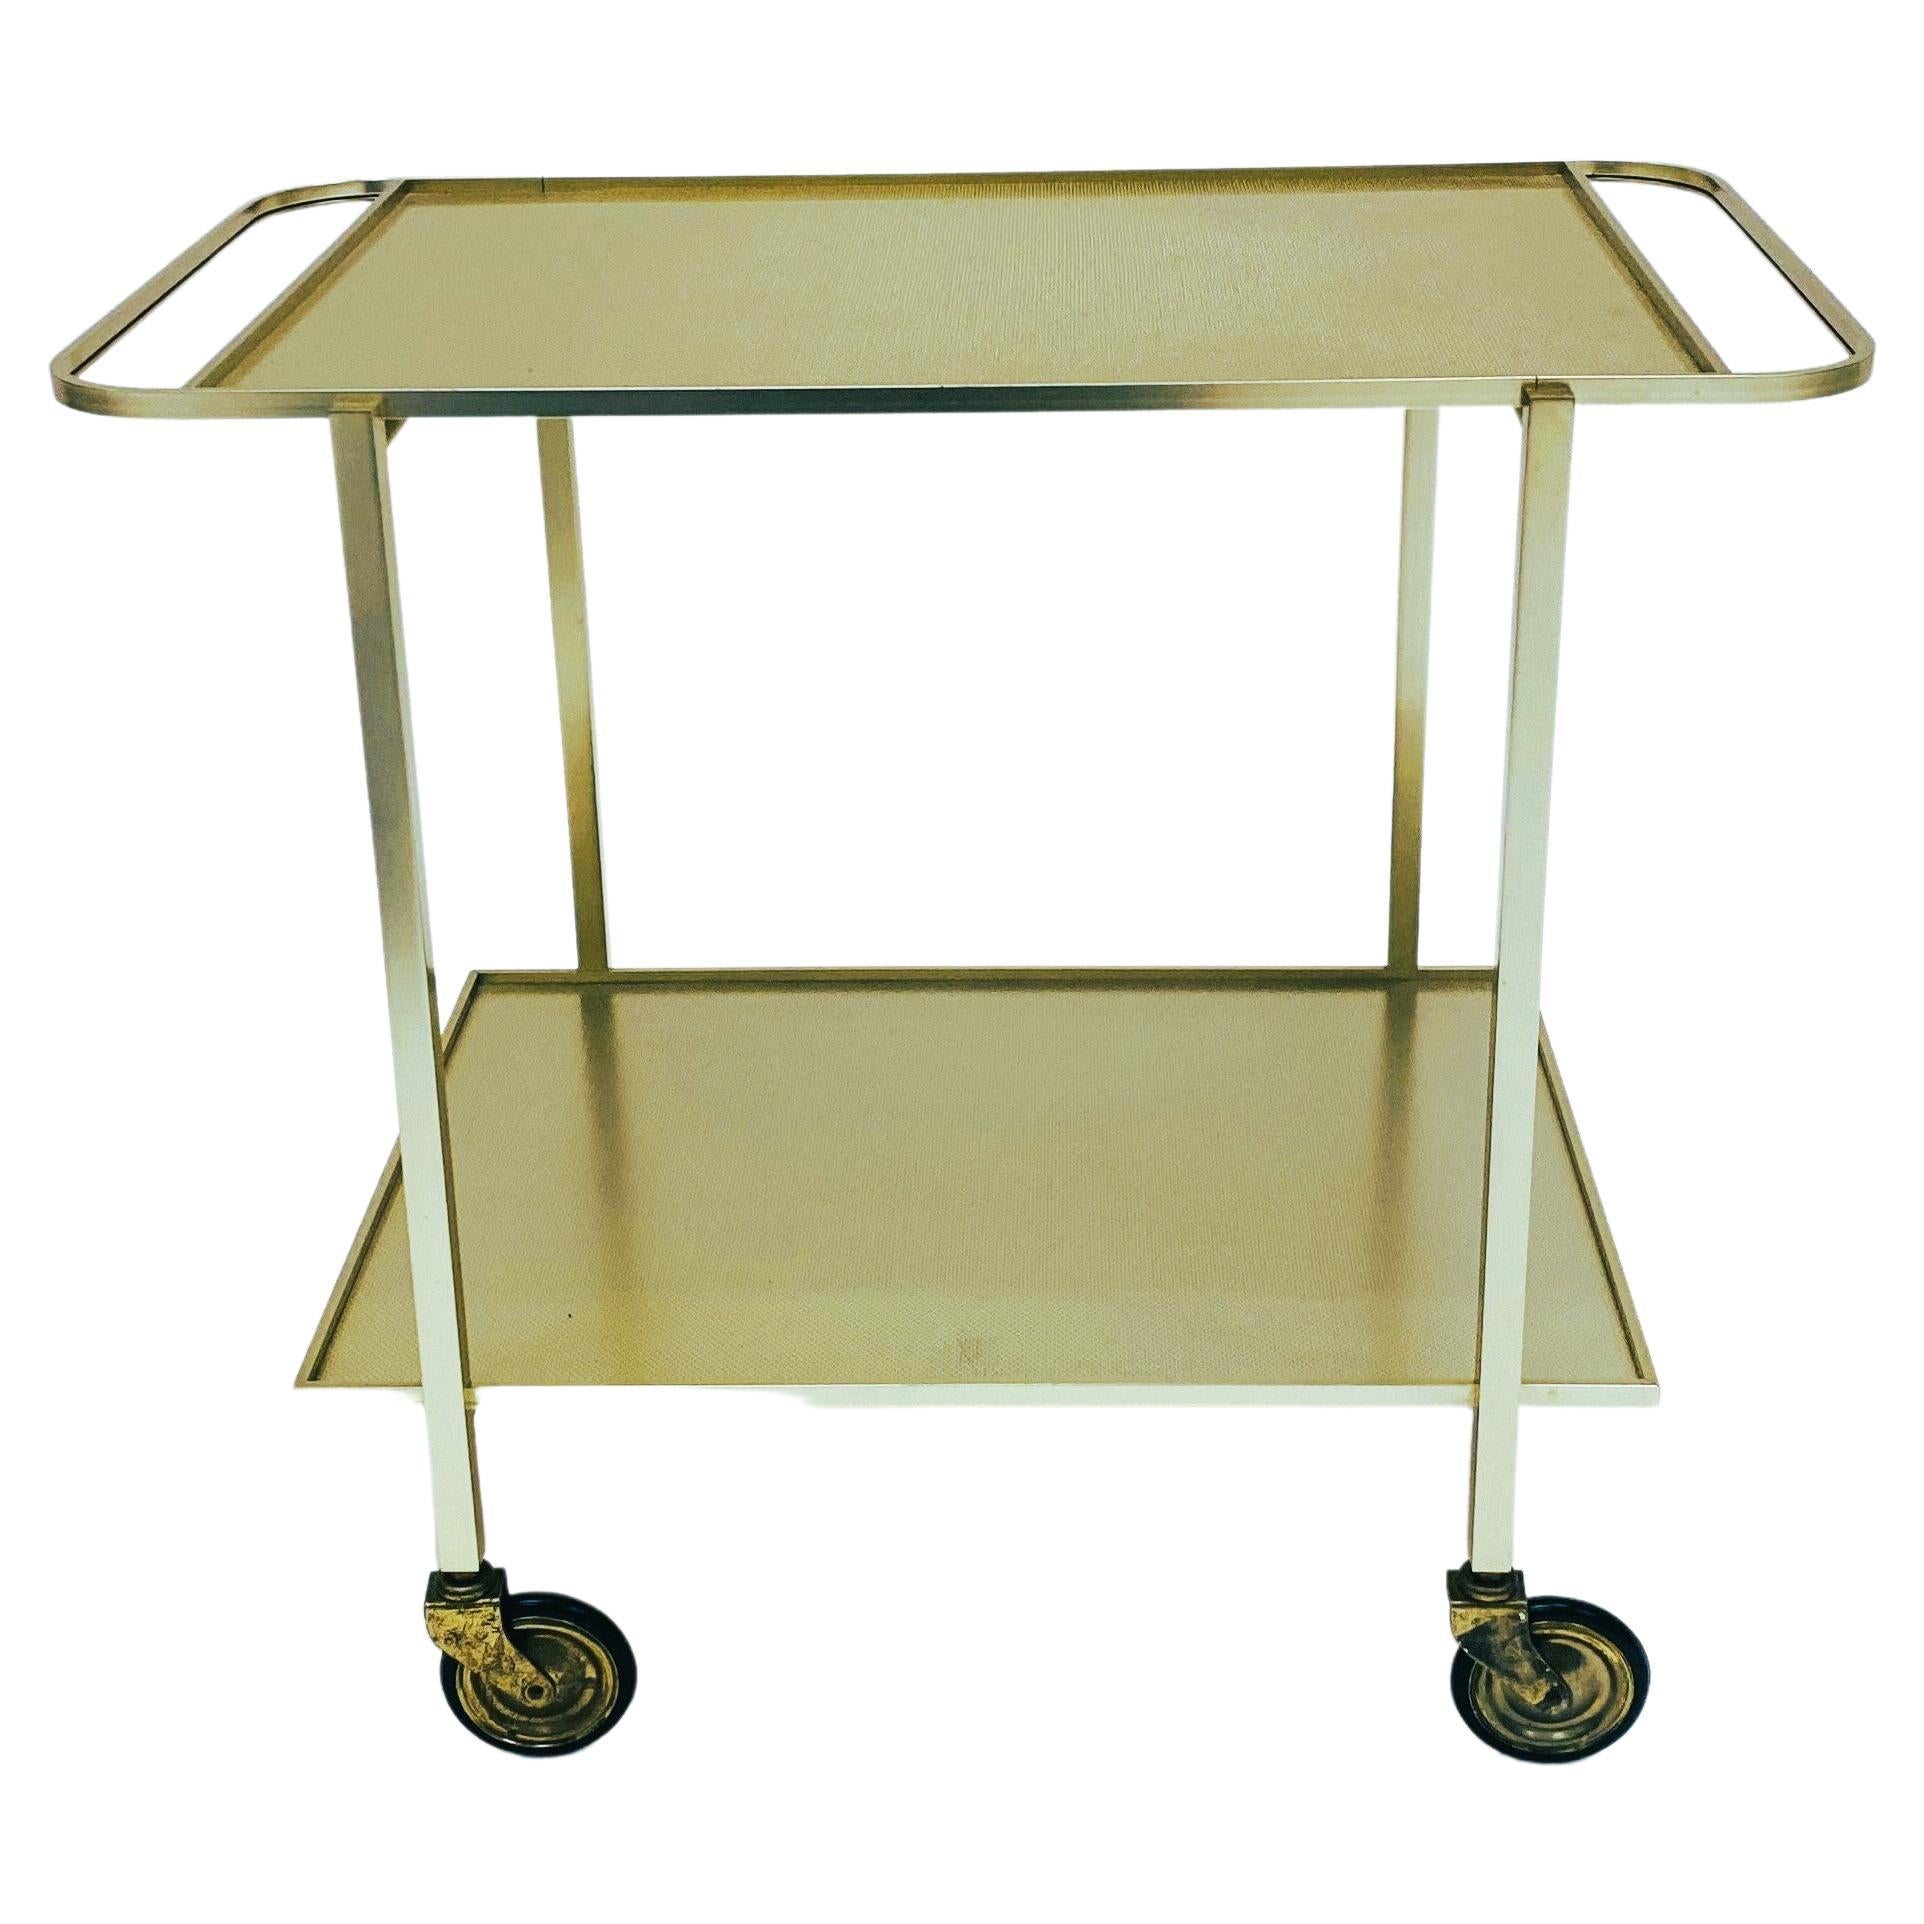 Gold Aluminum Bar Trolley by Werkenswurf Sihlmetall, Zwitserland, 1970s For Sale